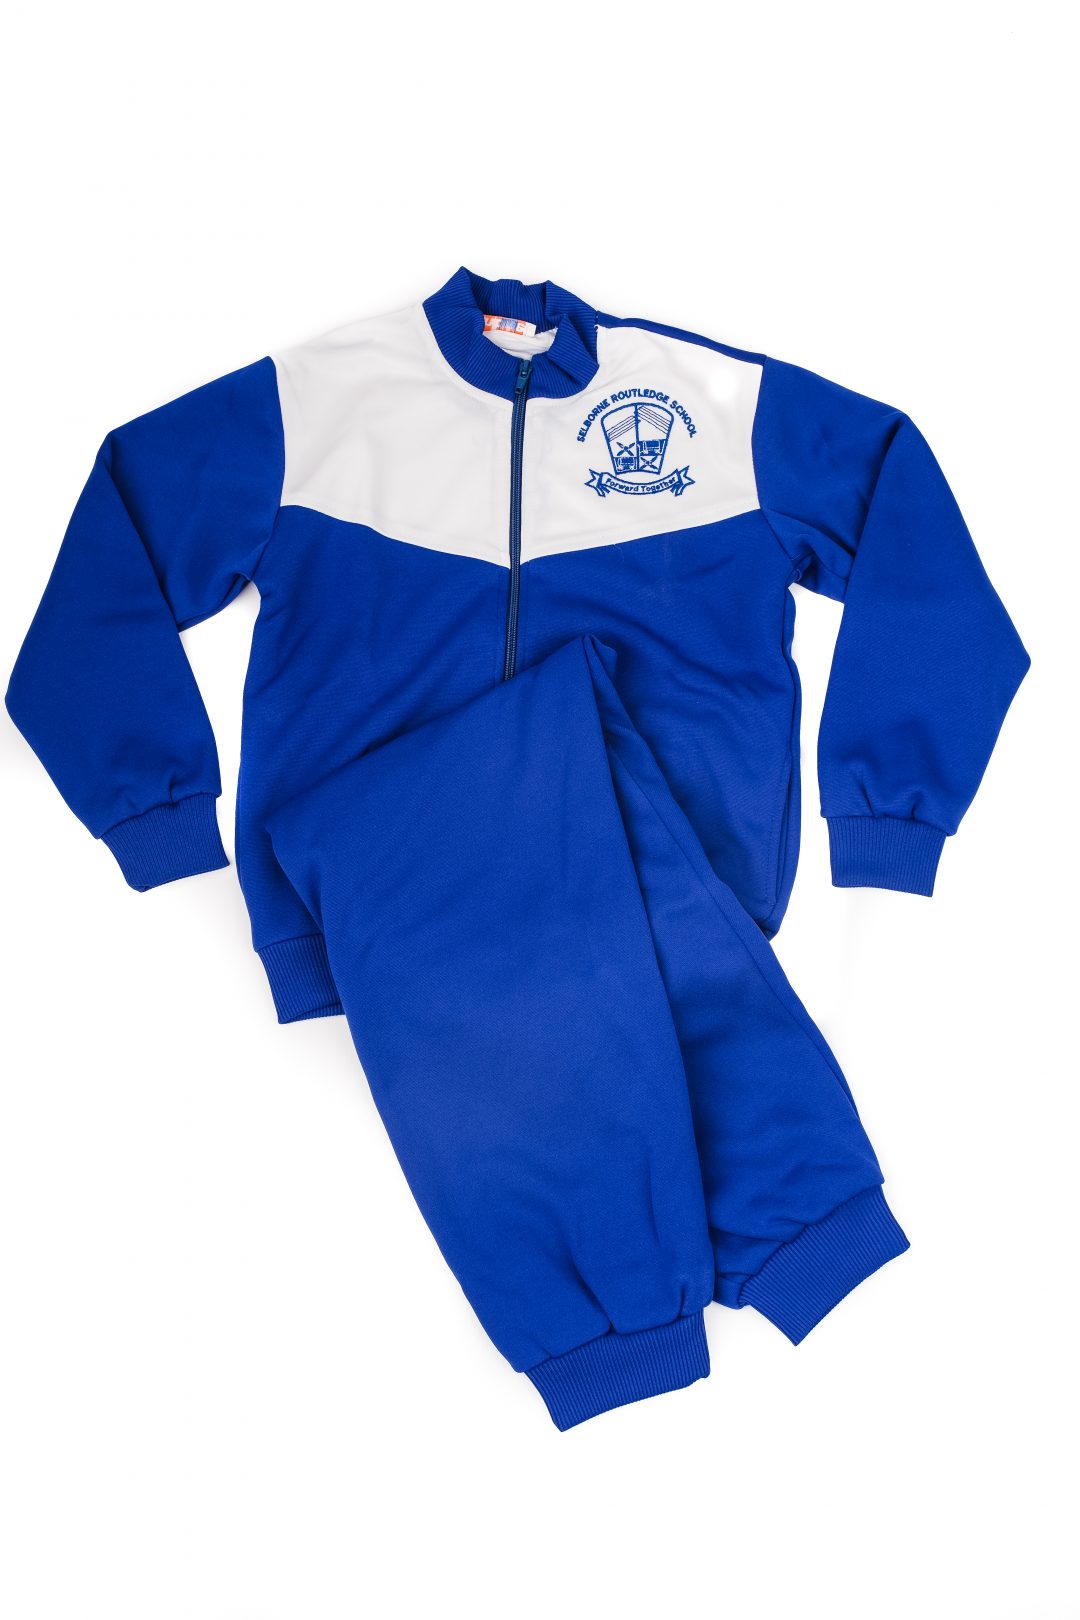 SELBOURNE ROUTLEDGE PRIMARY SCHOOL TRACKSUIT | Enbee Stores